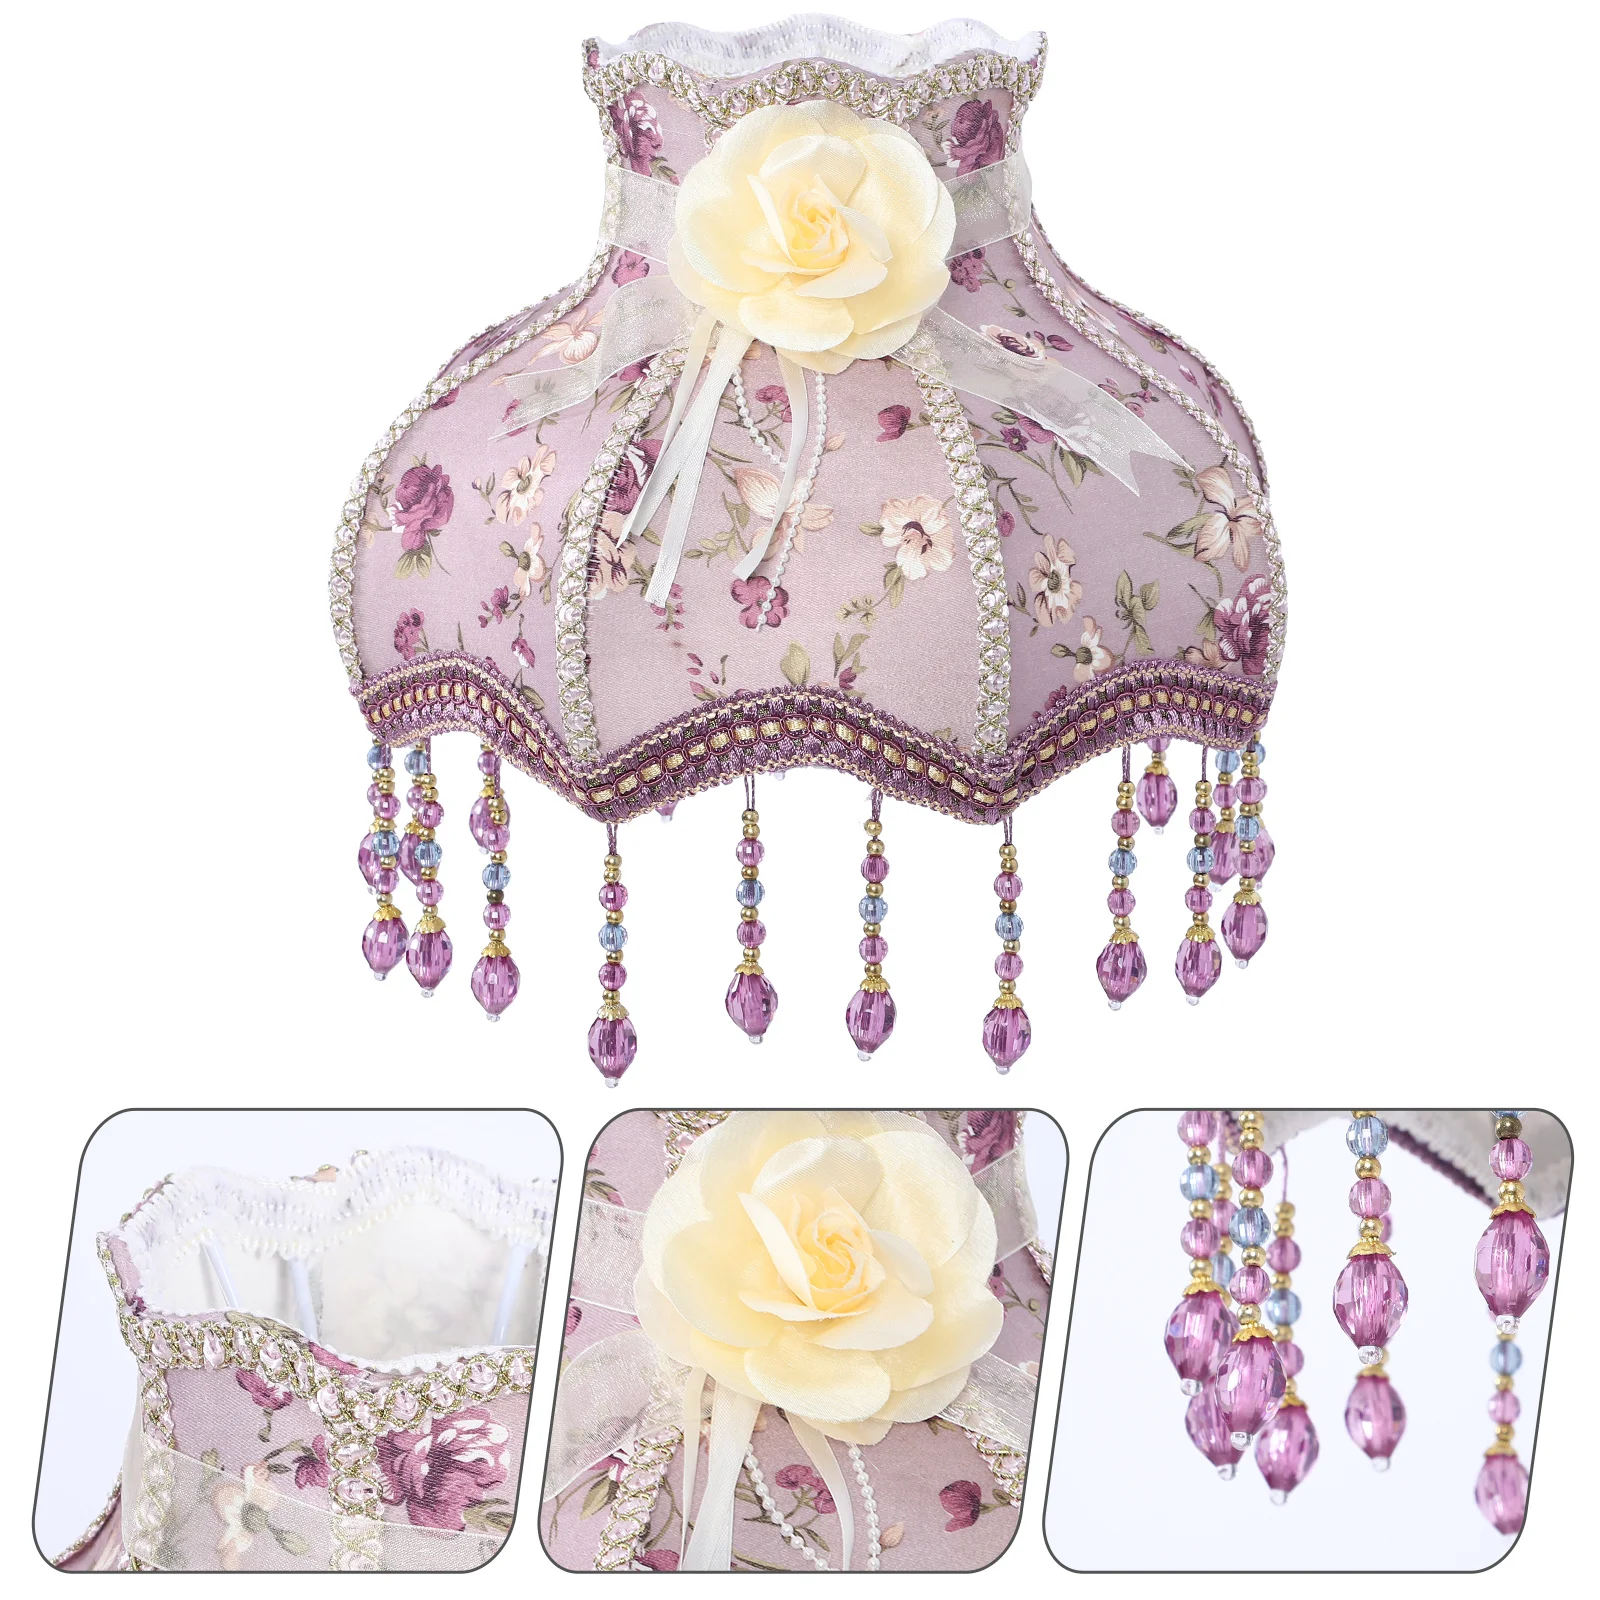 

Vintage Fabric Lamp Shade E27 Royal Scallop Bell Lampshade Replacement Lace Floral Pearl Beaded Light Shade Table Beside Lamp